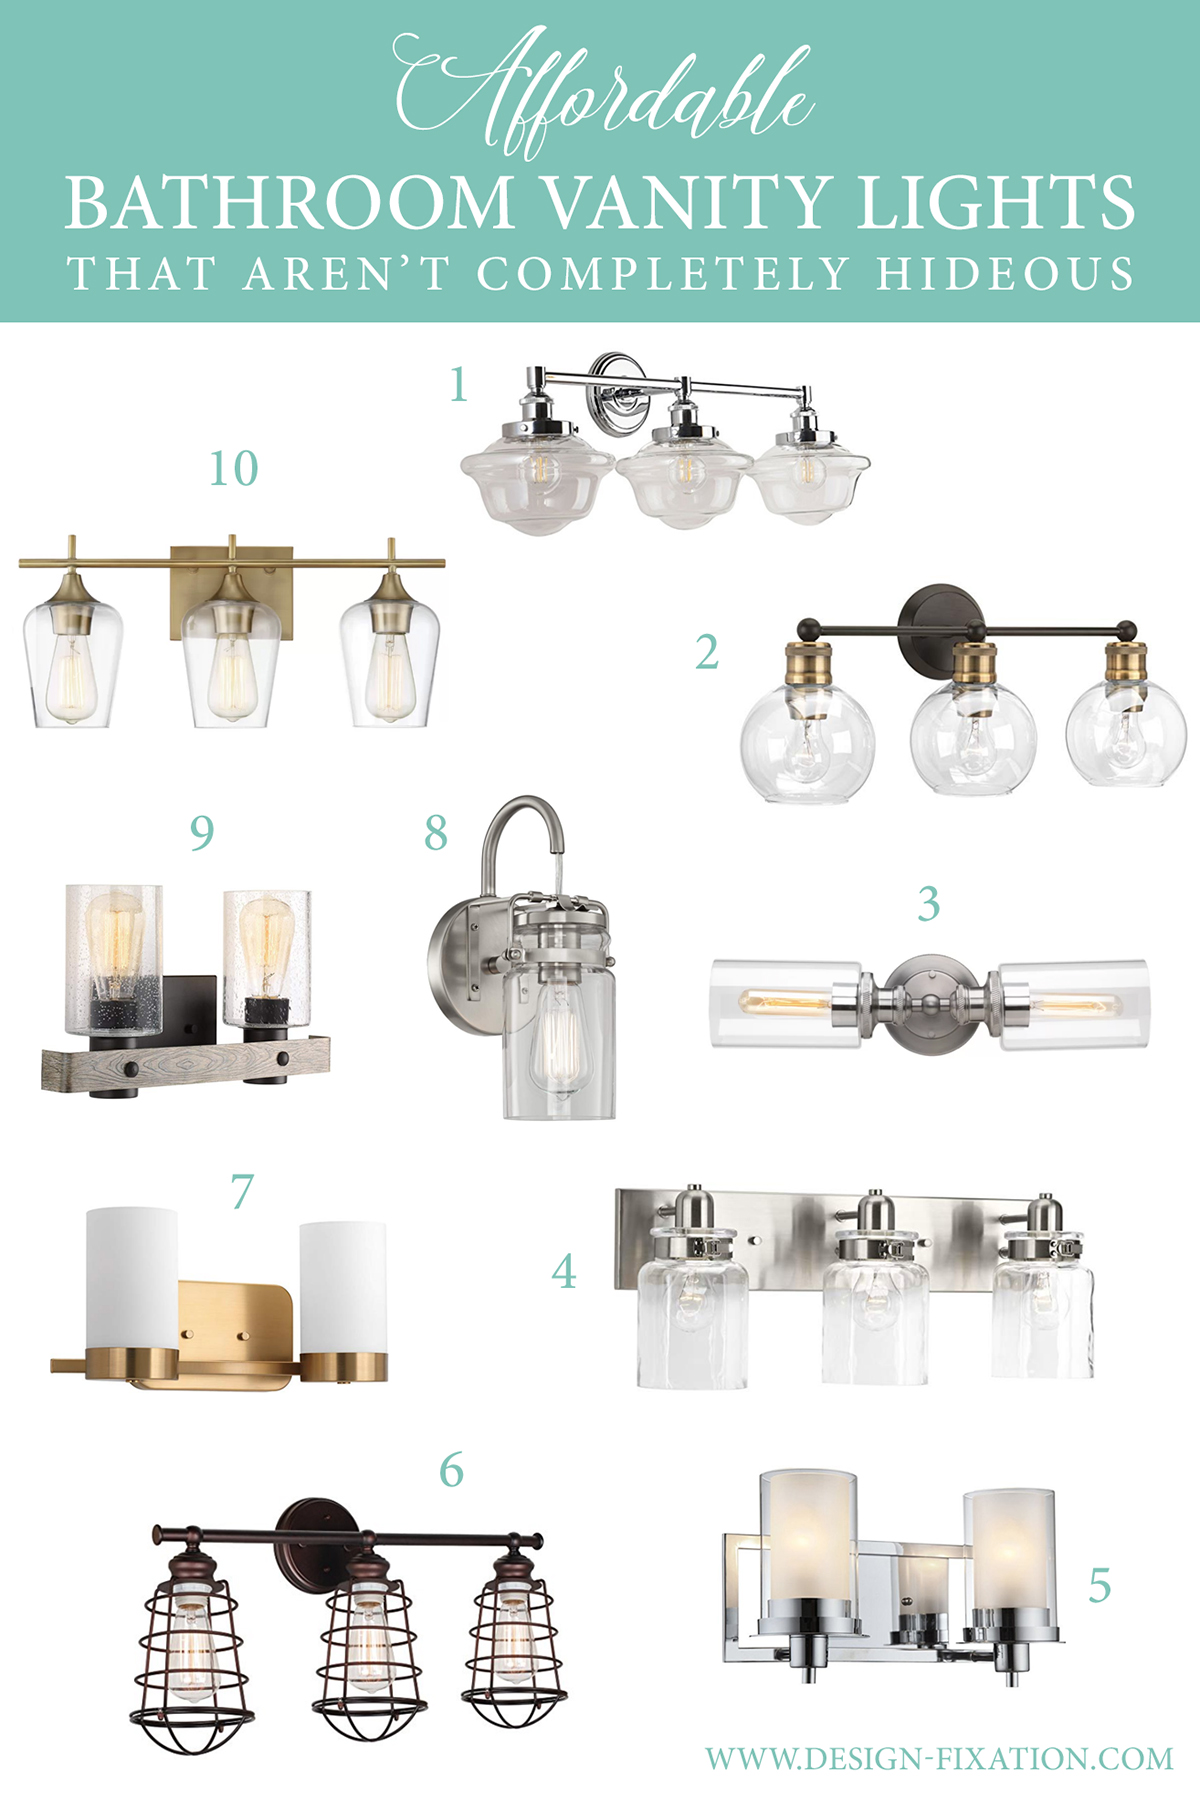 On the hunt for bathroom lighting that won't break the bank? You've come to the right place! Here are 10 affordable bathroom vanity lights that will fit the bill. /// Design Fixation #renovation #cheap #lighting